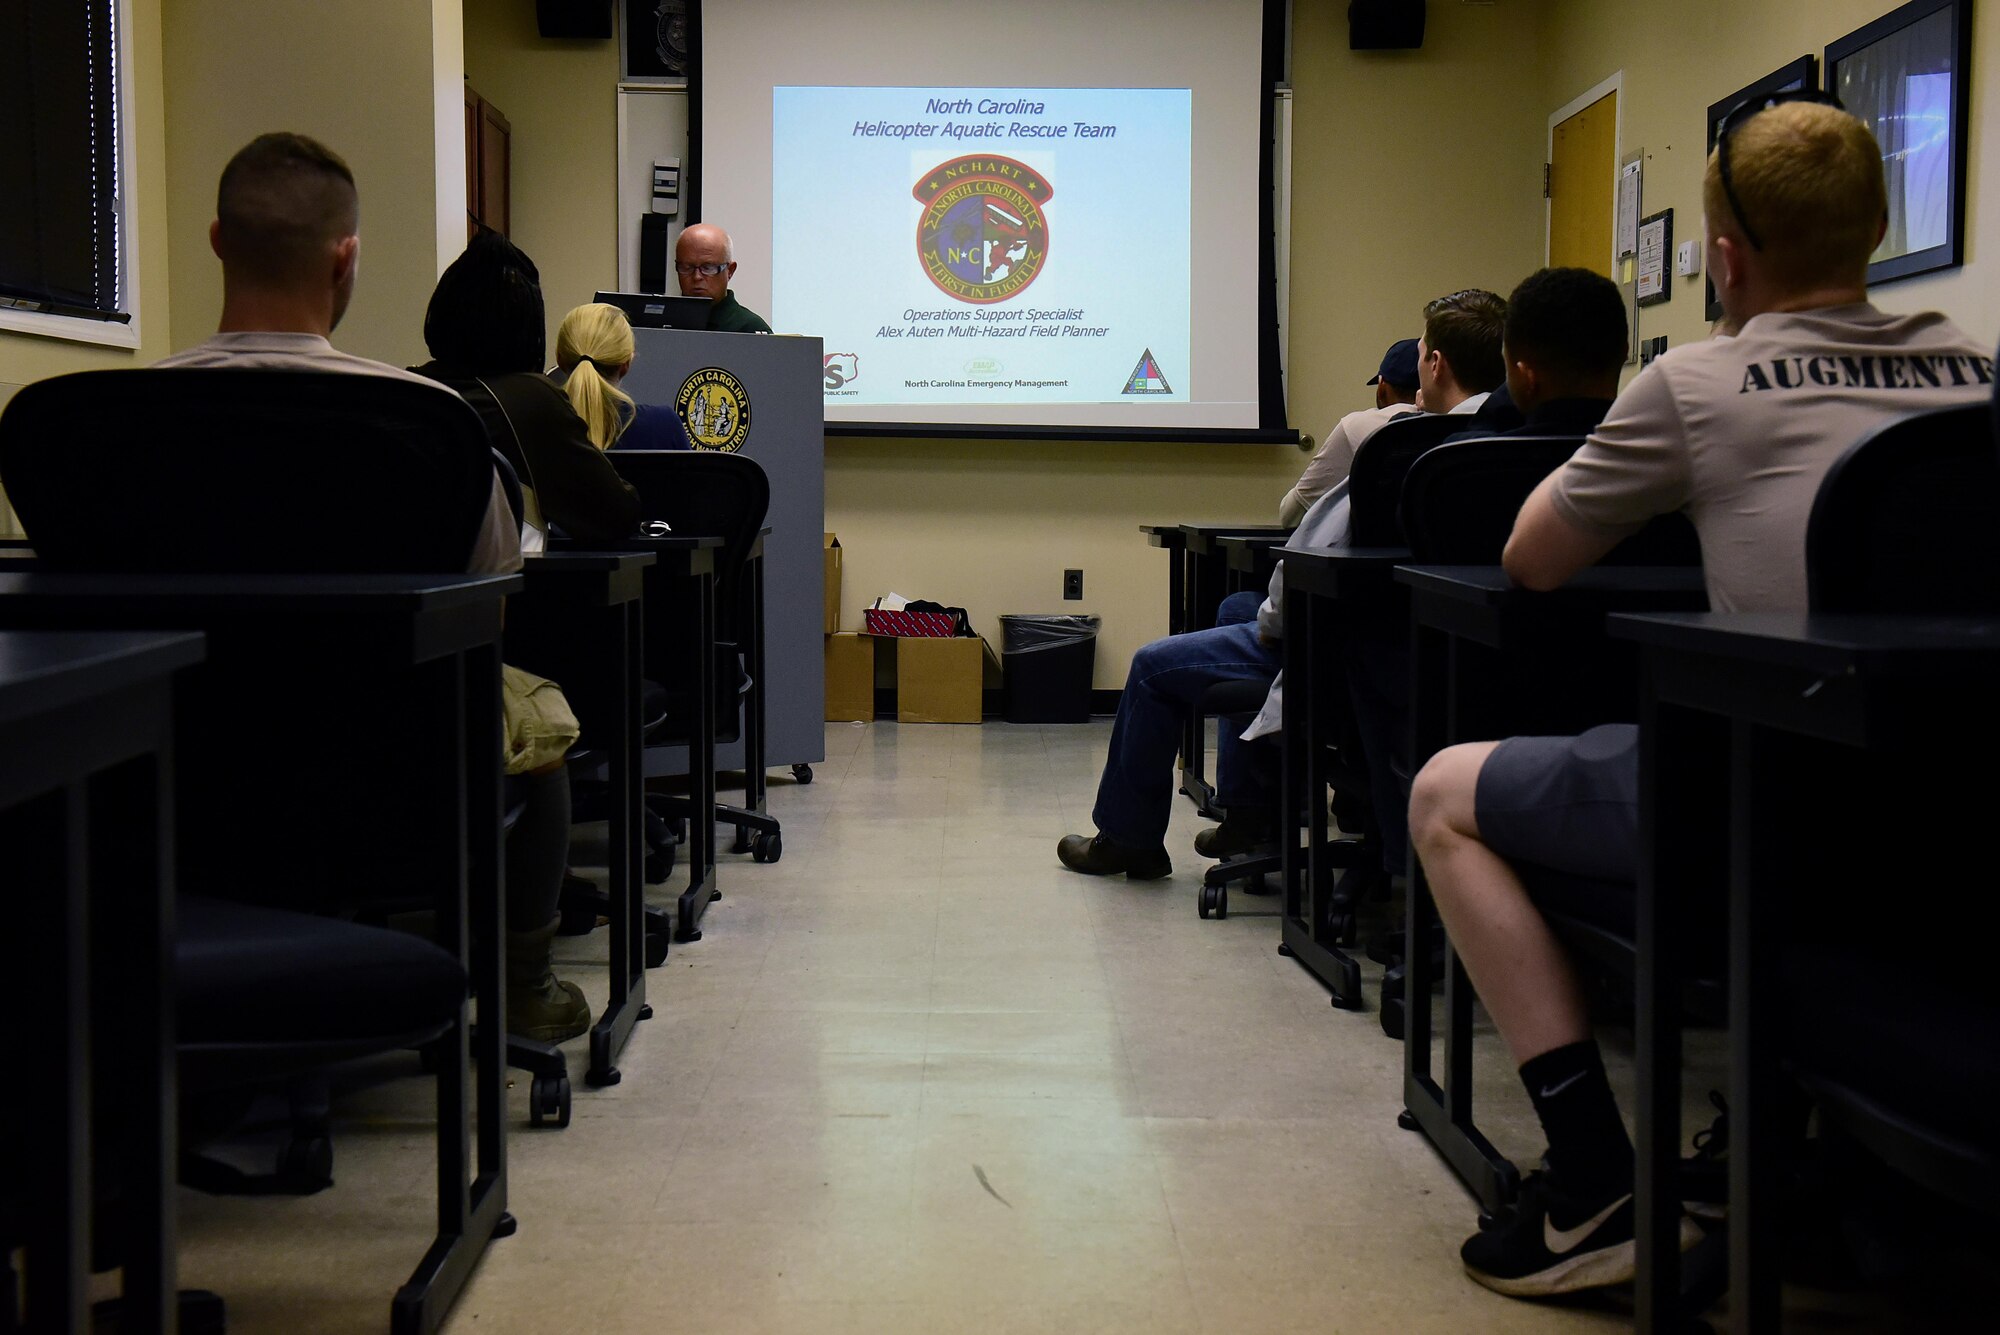 A group of survival, evasion, resistance and escape augmentees from the 4th Fighter Wing attend a North Carolina Helicopter Aquatic Rescue Team briefing led by Alex Auten, NC Emergency Management multi-hazard field planner, before observing a training exercise, July 20, 2017, at the NC State Highway Patrol Precision Driver's Training Facility, Raleigh, North Carolina. In order to become a SERE augmentee, the Airmen need to pass the SERE physical ability and stamina test, a water survival training course as well as a combat survival training course. (U.S. Air Force photo by Airman 1st Class Kenneth Boyton)